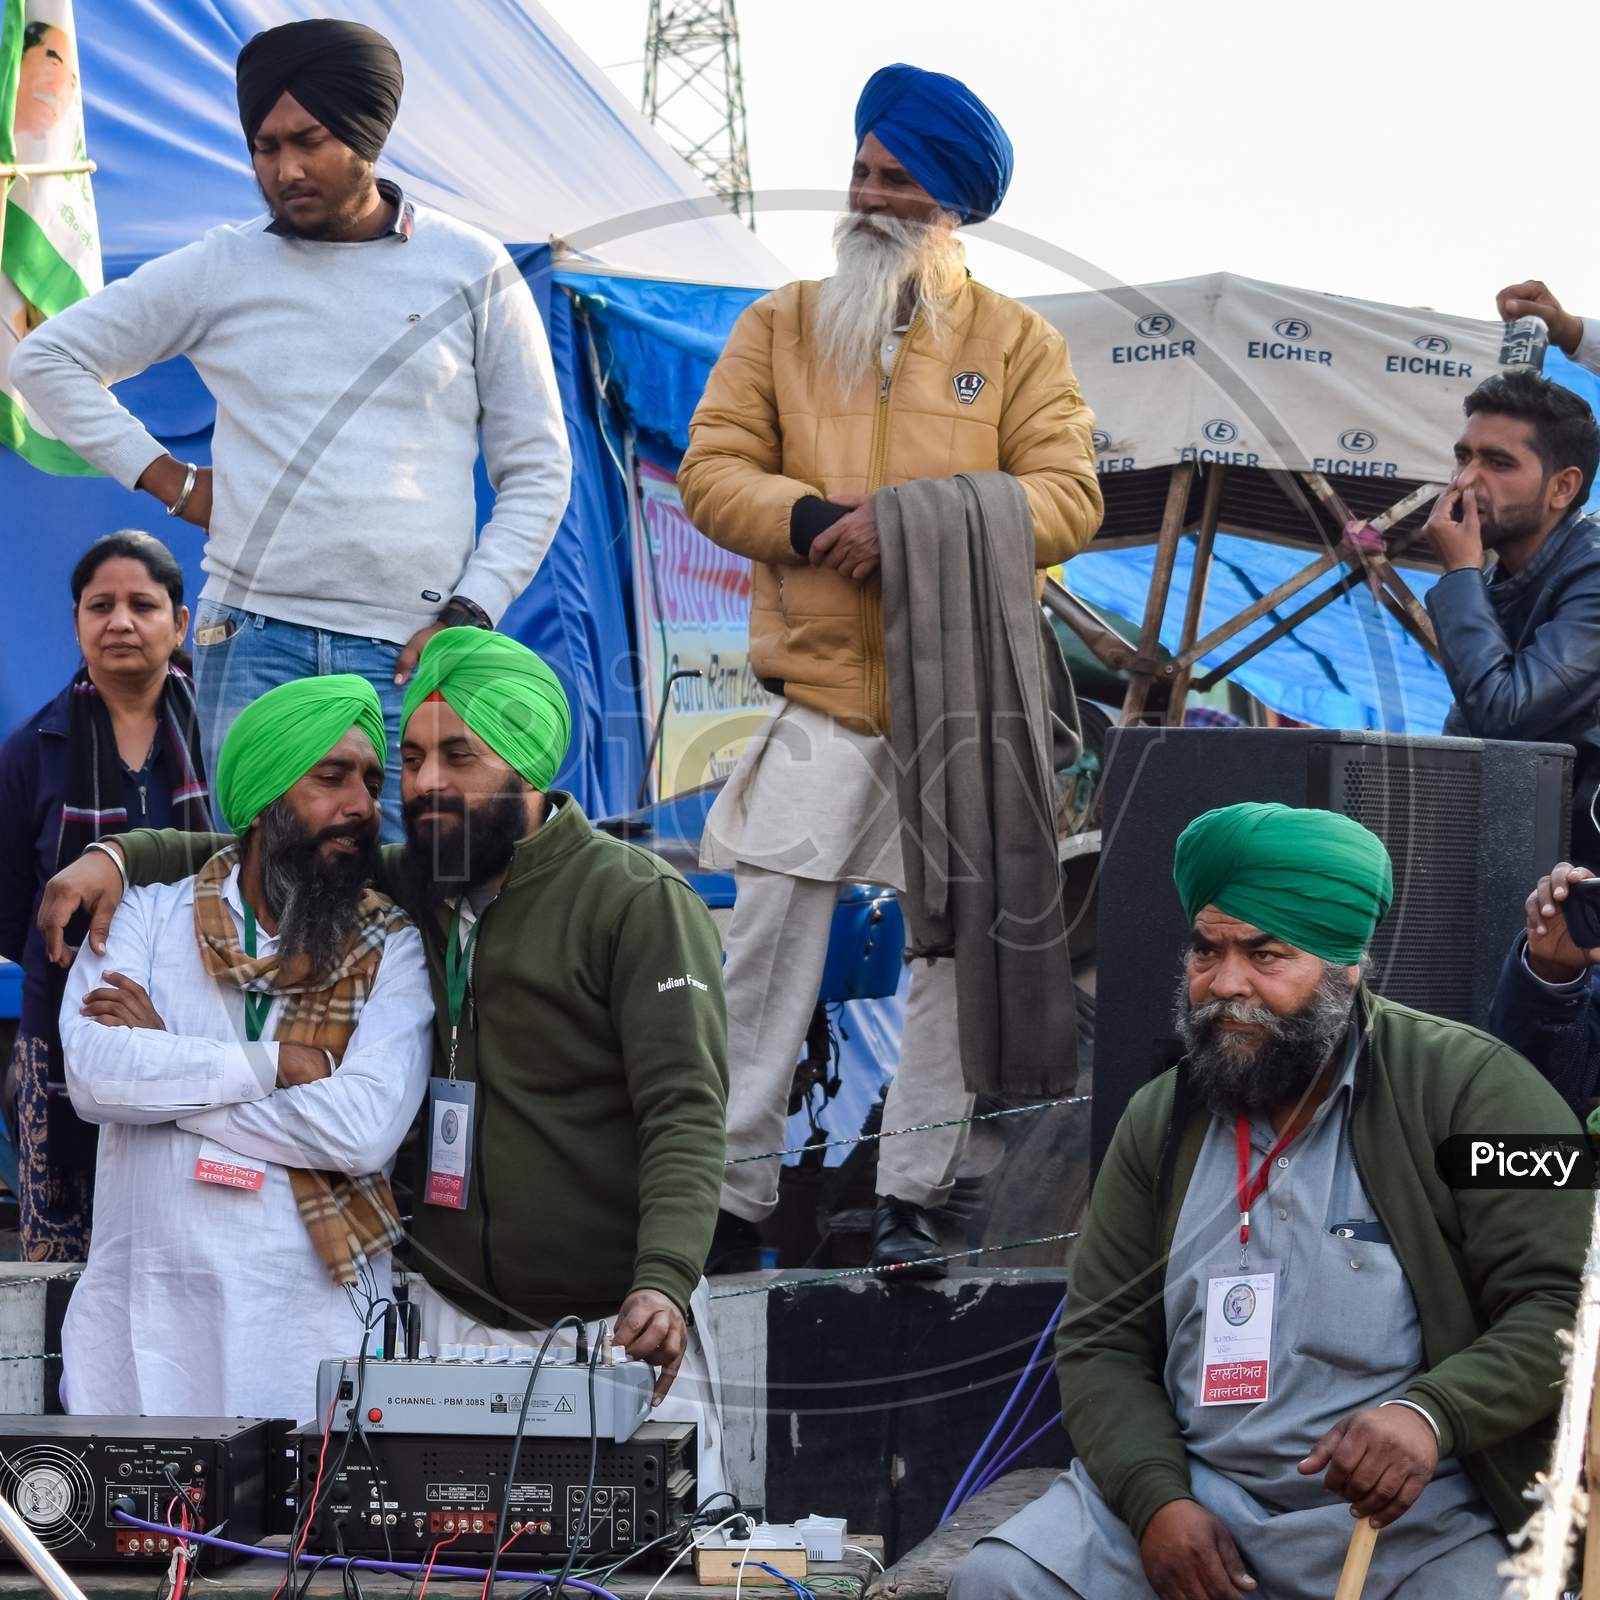 New Delhi, India – December 25 2020 : Indian Sikh And Hindu Farmers From Punjab, Uttar Pradesh And Uttarakhand States Protests At Delhi-Up Border. Farmers Are Protesting Against The New Farmer Laws